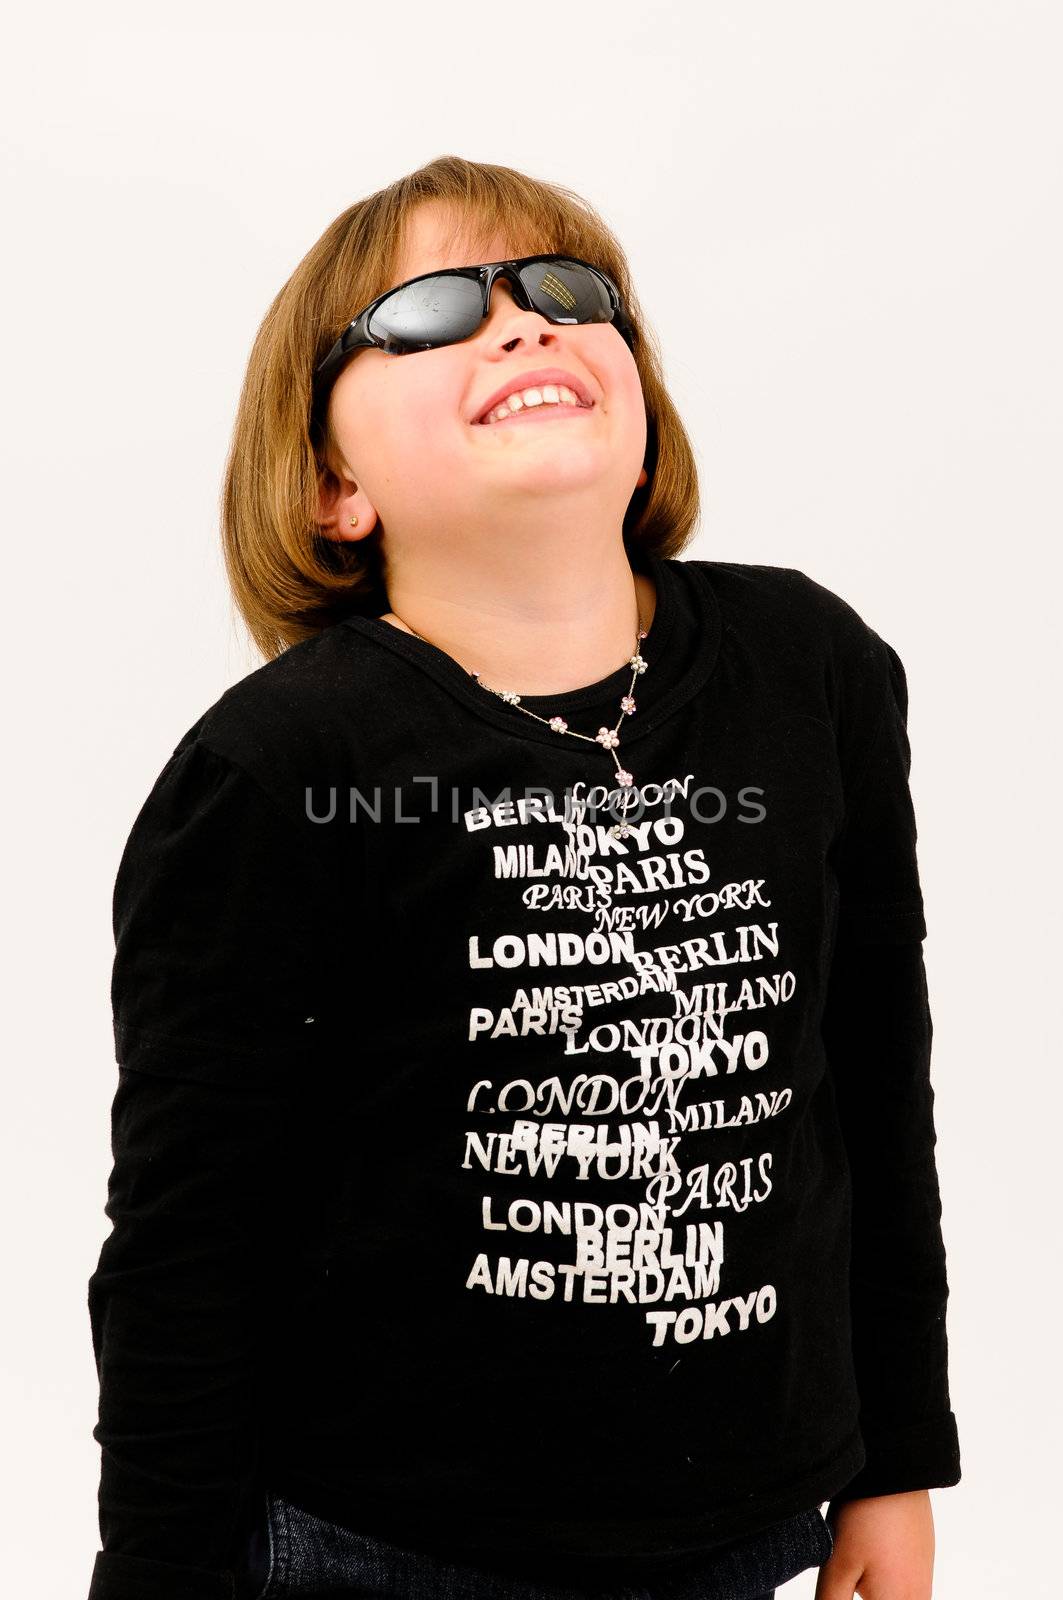 young beautiful  teenager with sun glasses smiling with dimple in cheek looking up by Ansunette